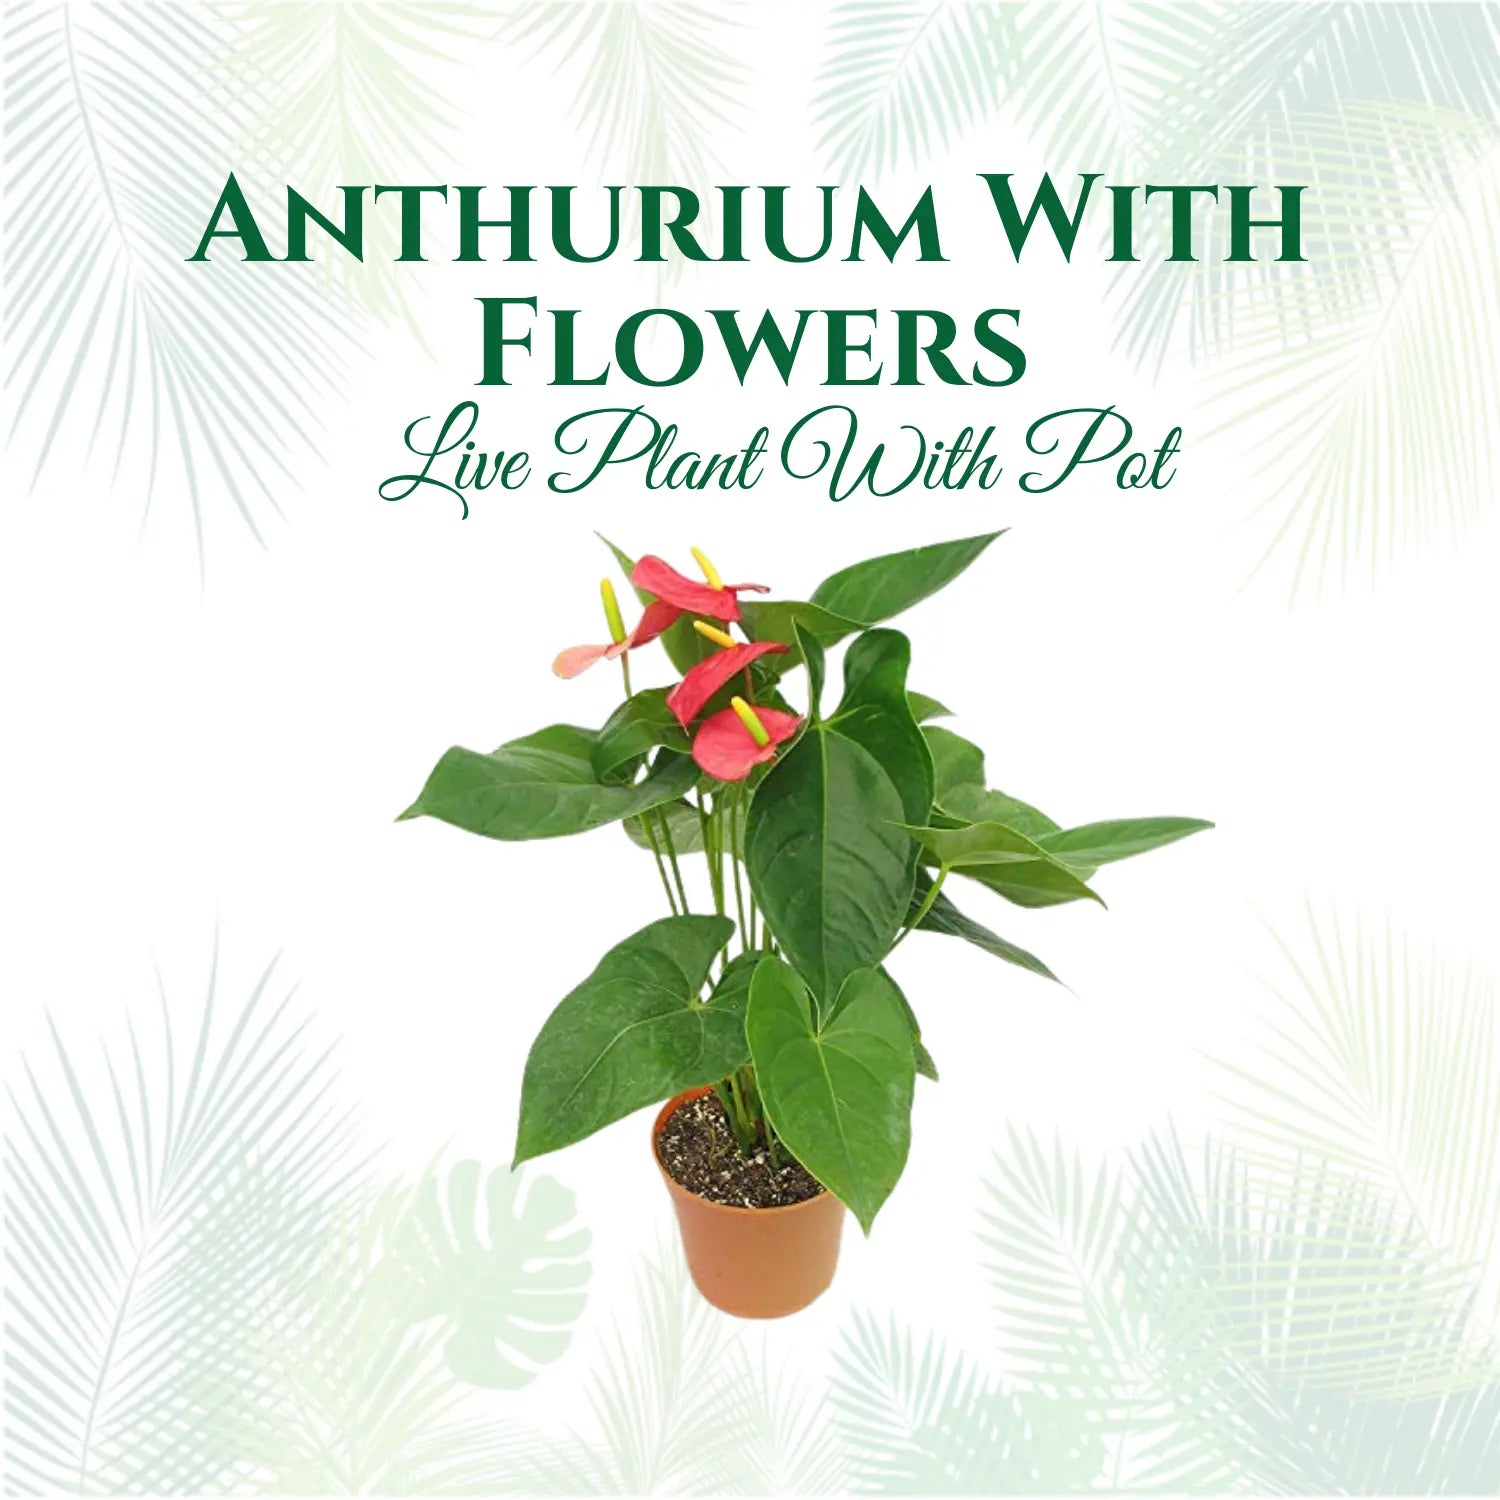 Anthurium with Flowers Live Plant with Pot (Natural Plant - Flower Colour May Vary)